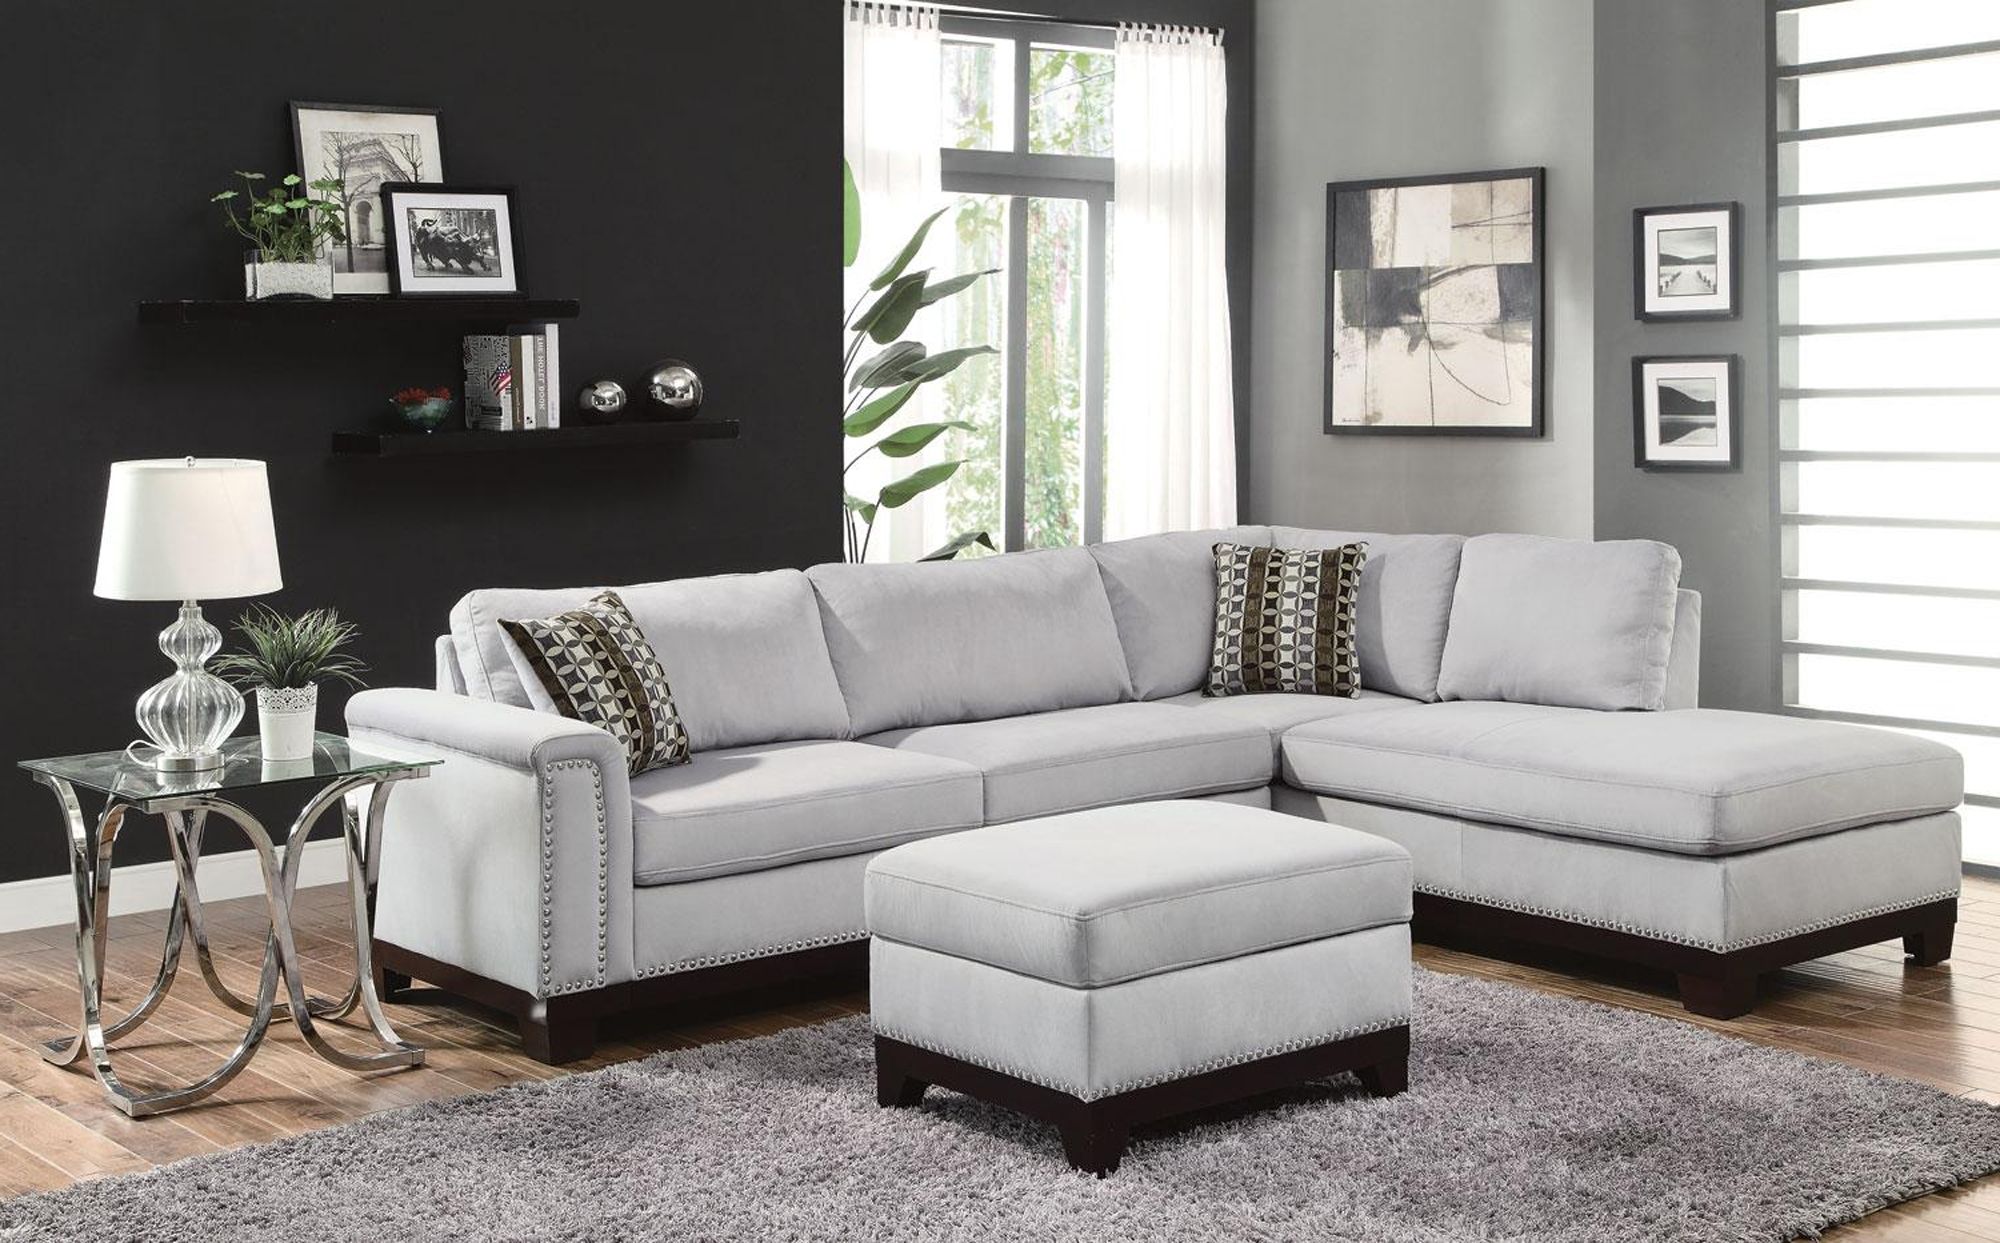 $1051.92 Mason Sectional Sofa With Nailhead Trim And Accent Within Preferred Sectional Sofas With Nailheads (Photo 7 of 15)